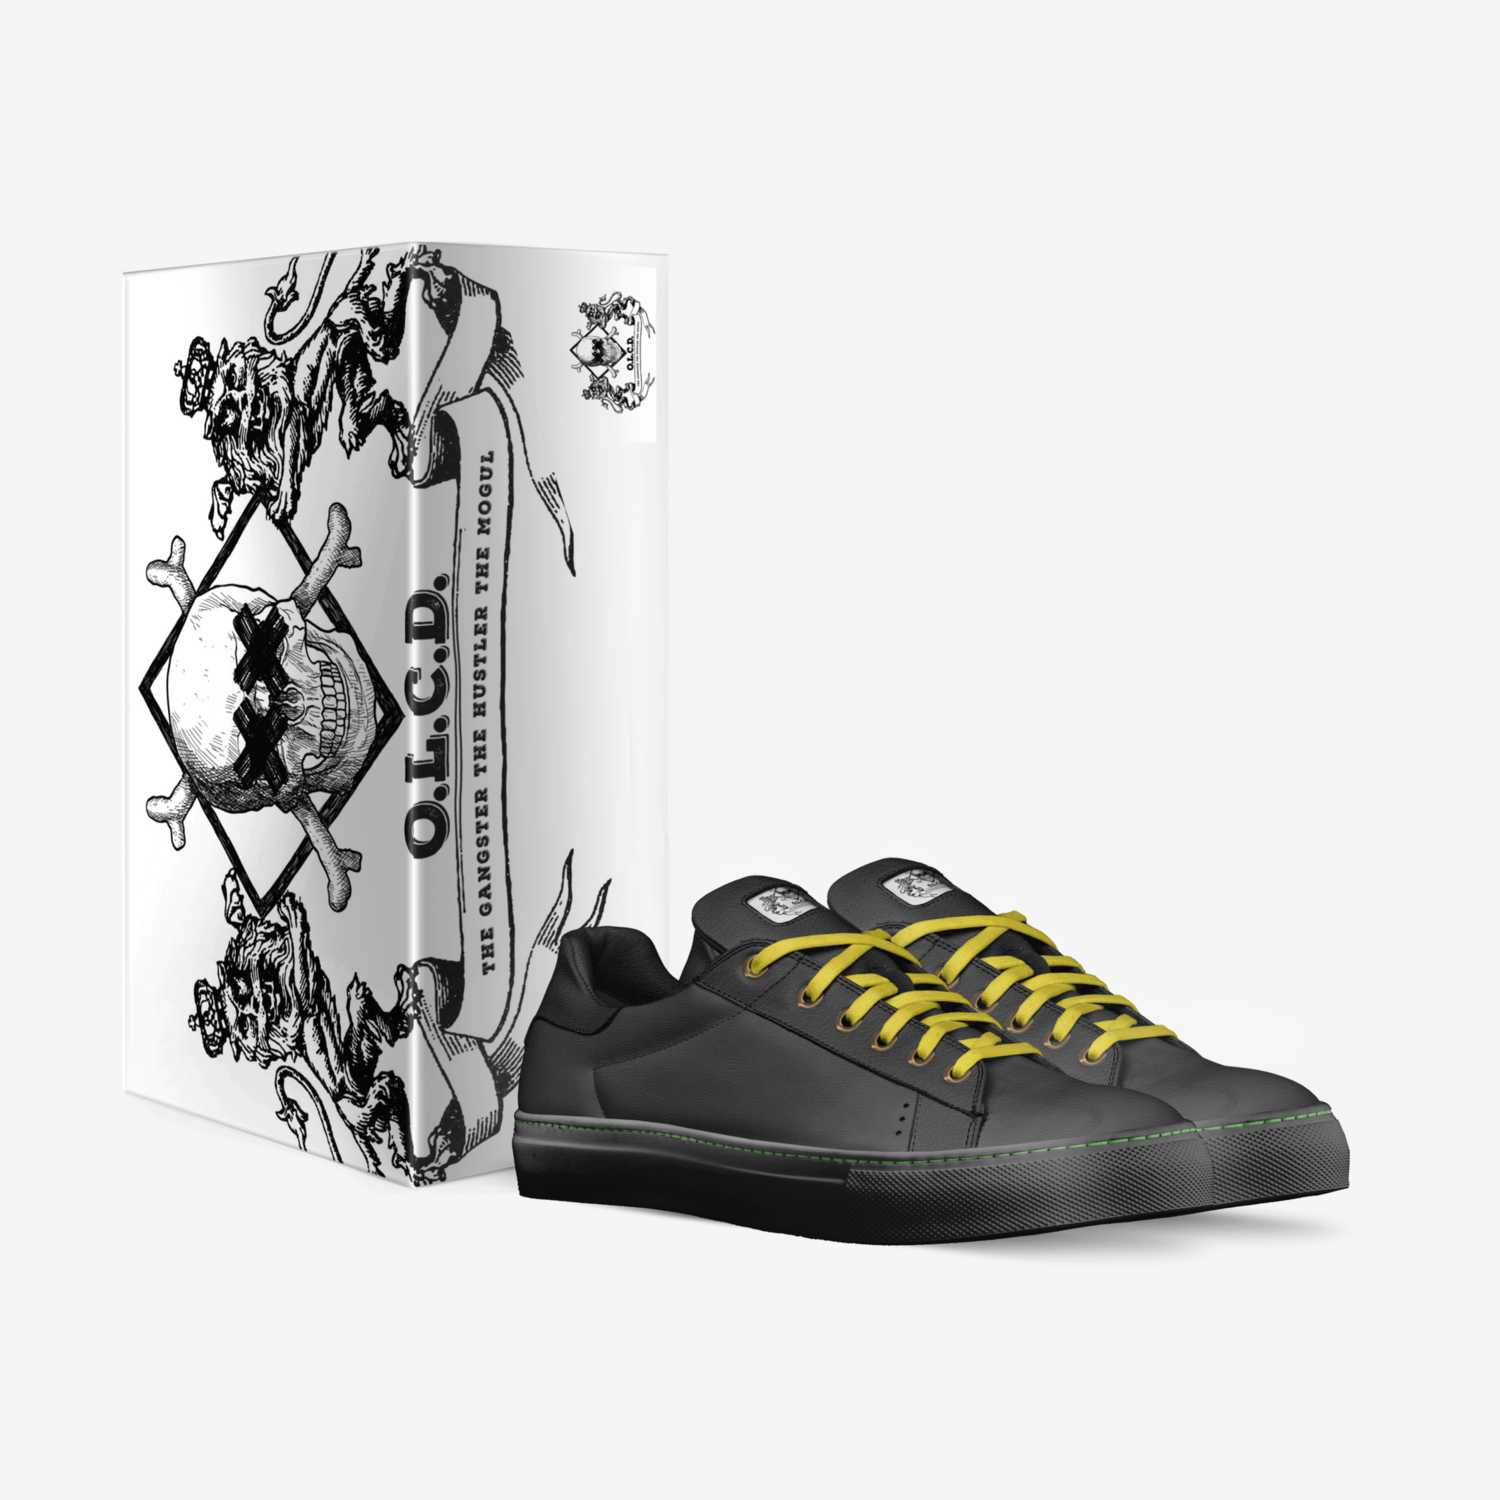 OLCD Concept 001 custom made in Italy shoes by Marc Love | Box view